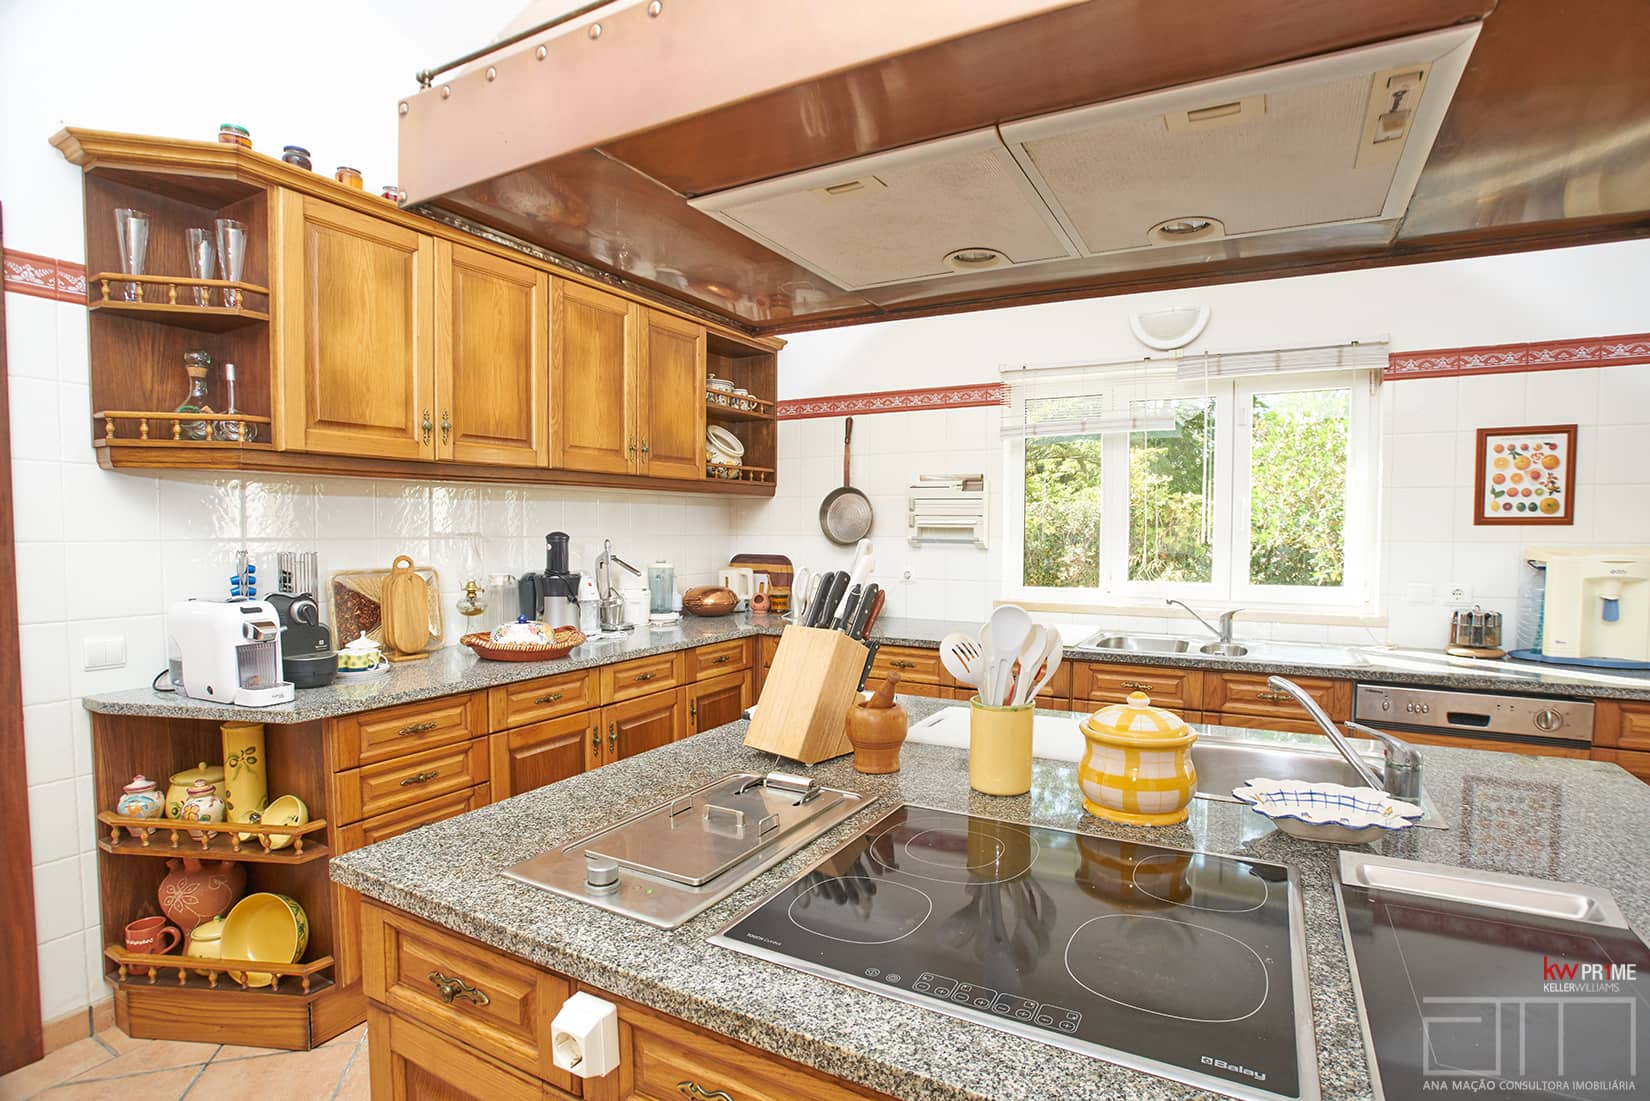 View of the central countertop with stovetop